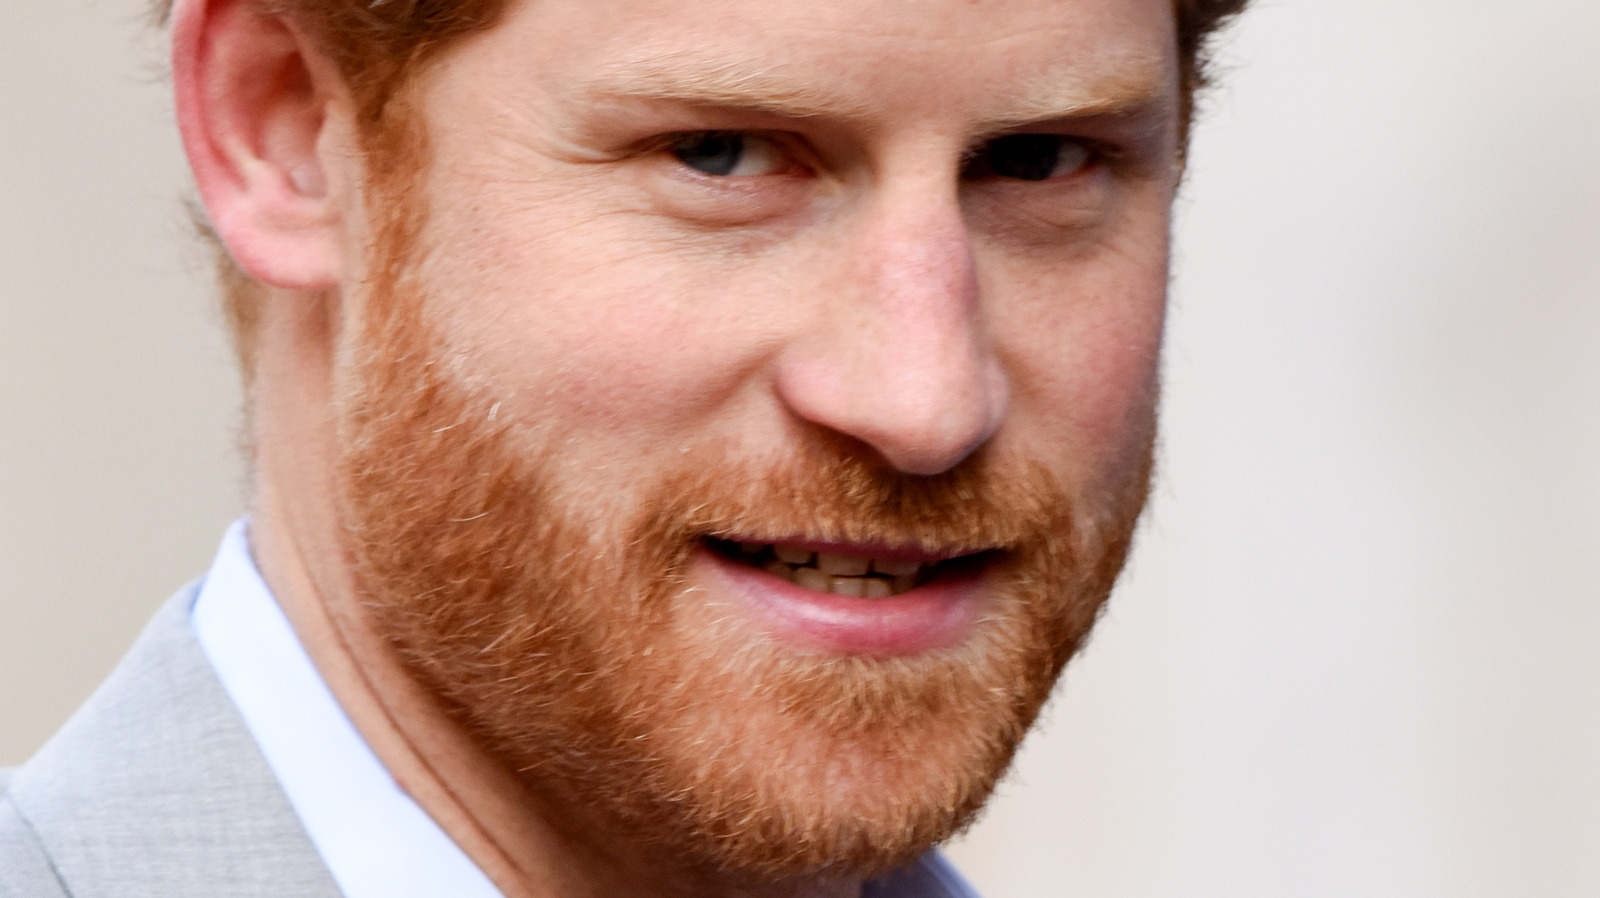 Prince Harry's Latest Interview Has Him Taking On An Unexpected New Role